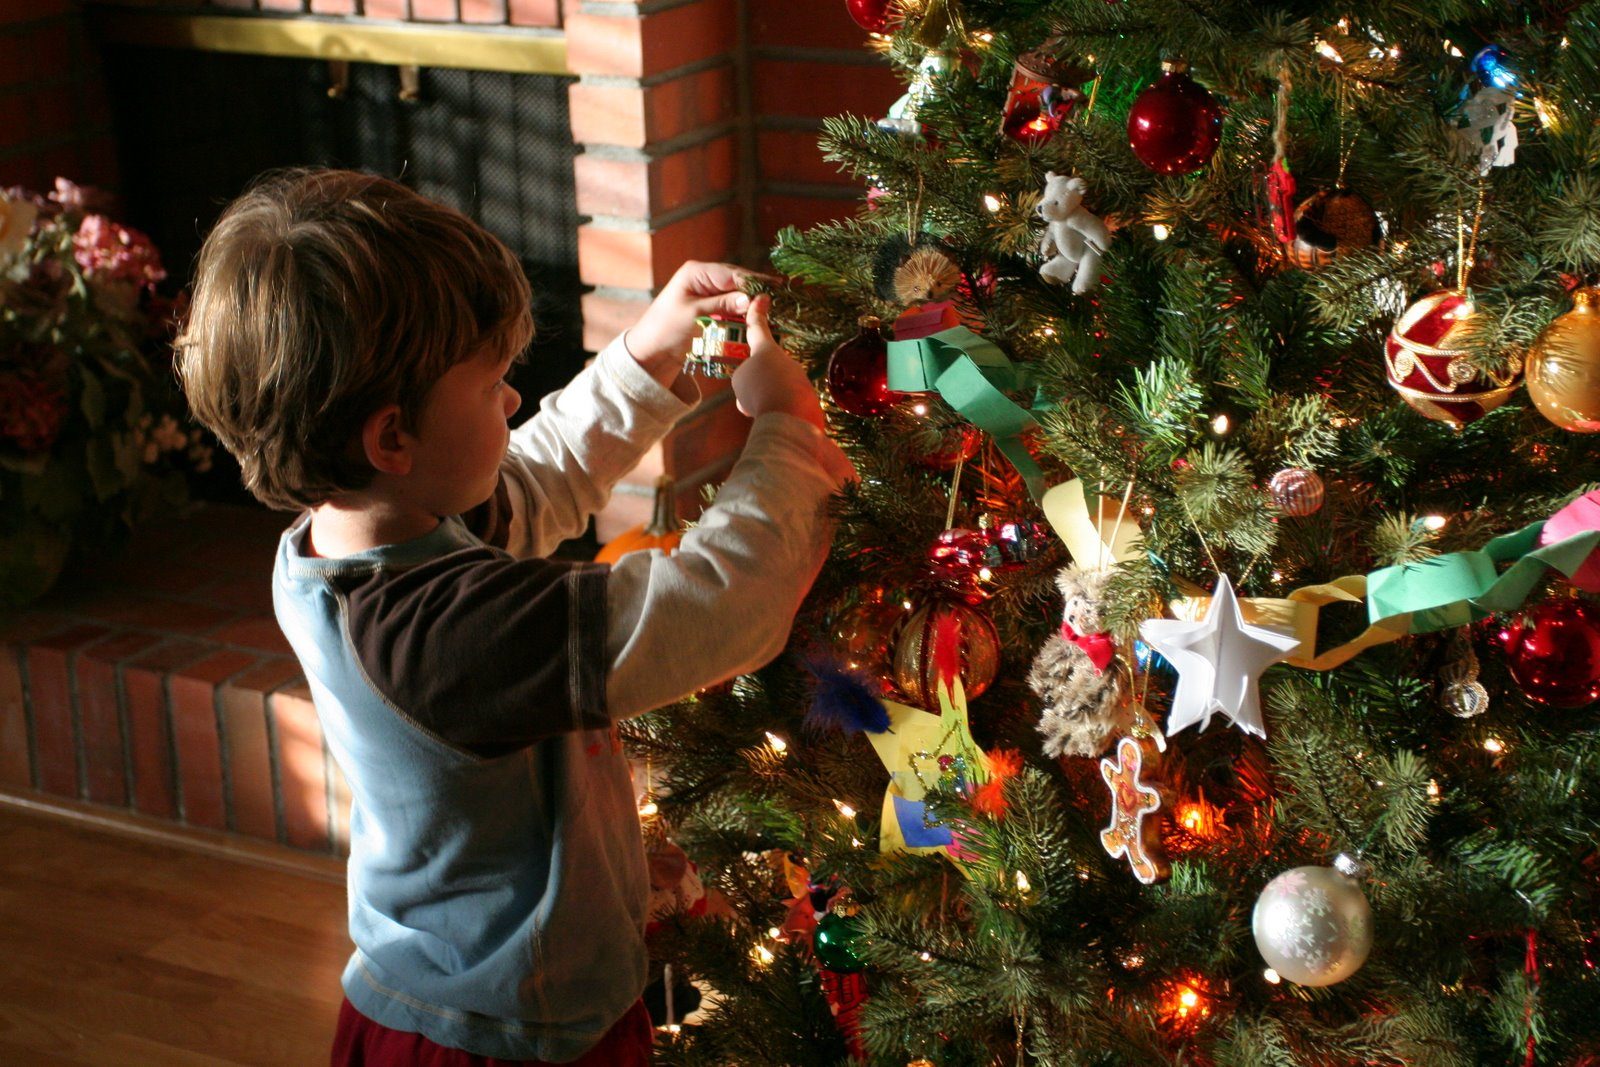 People Who Put Up Christmas Decorations Early Are Happier According to Psychology Experts